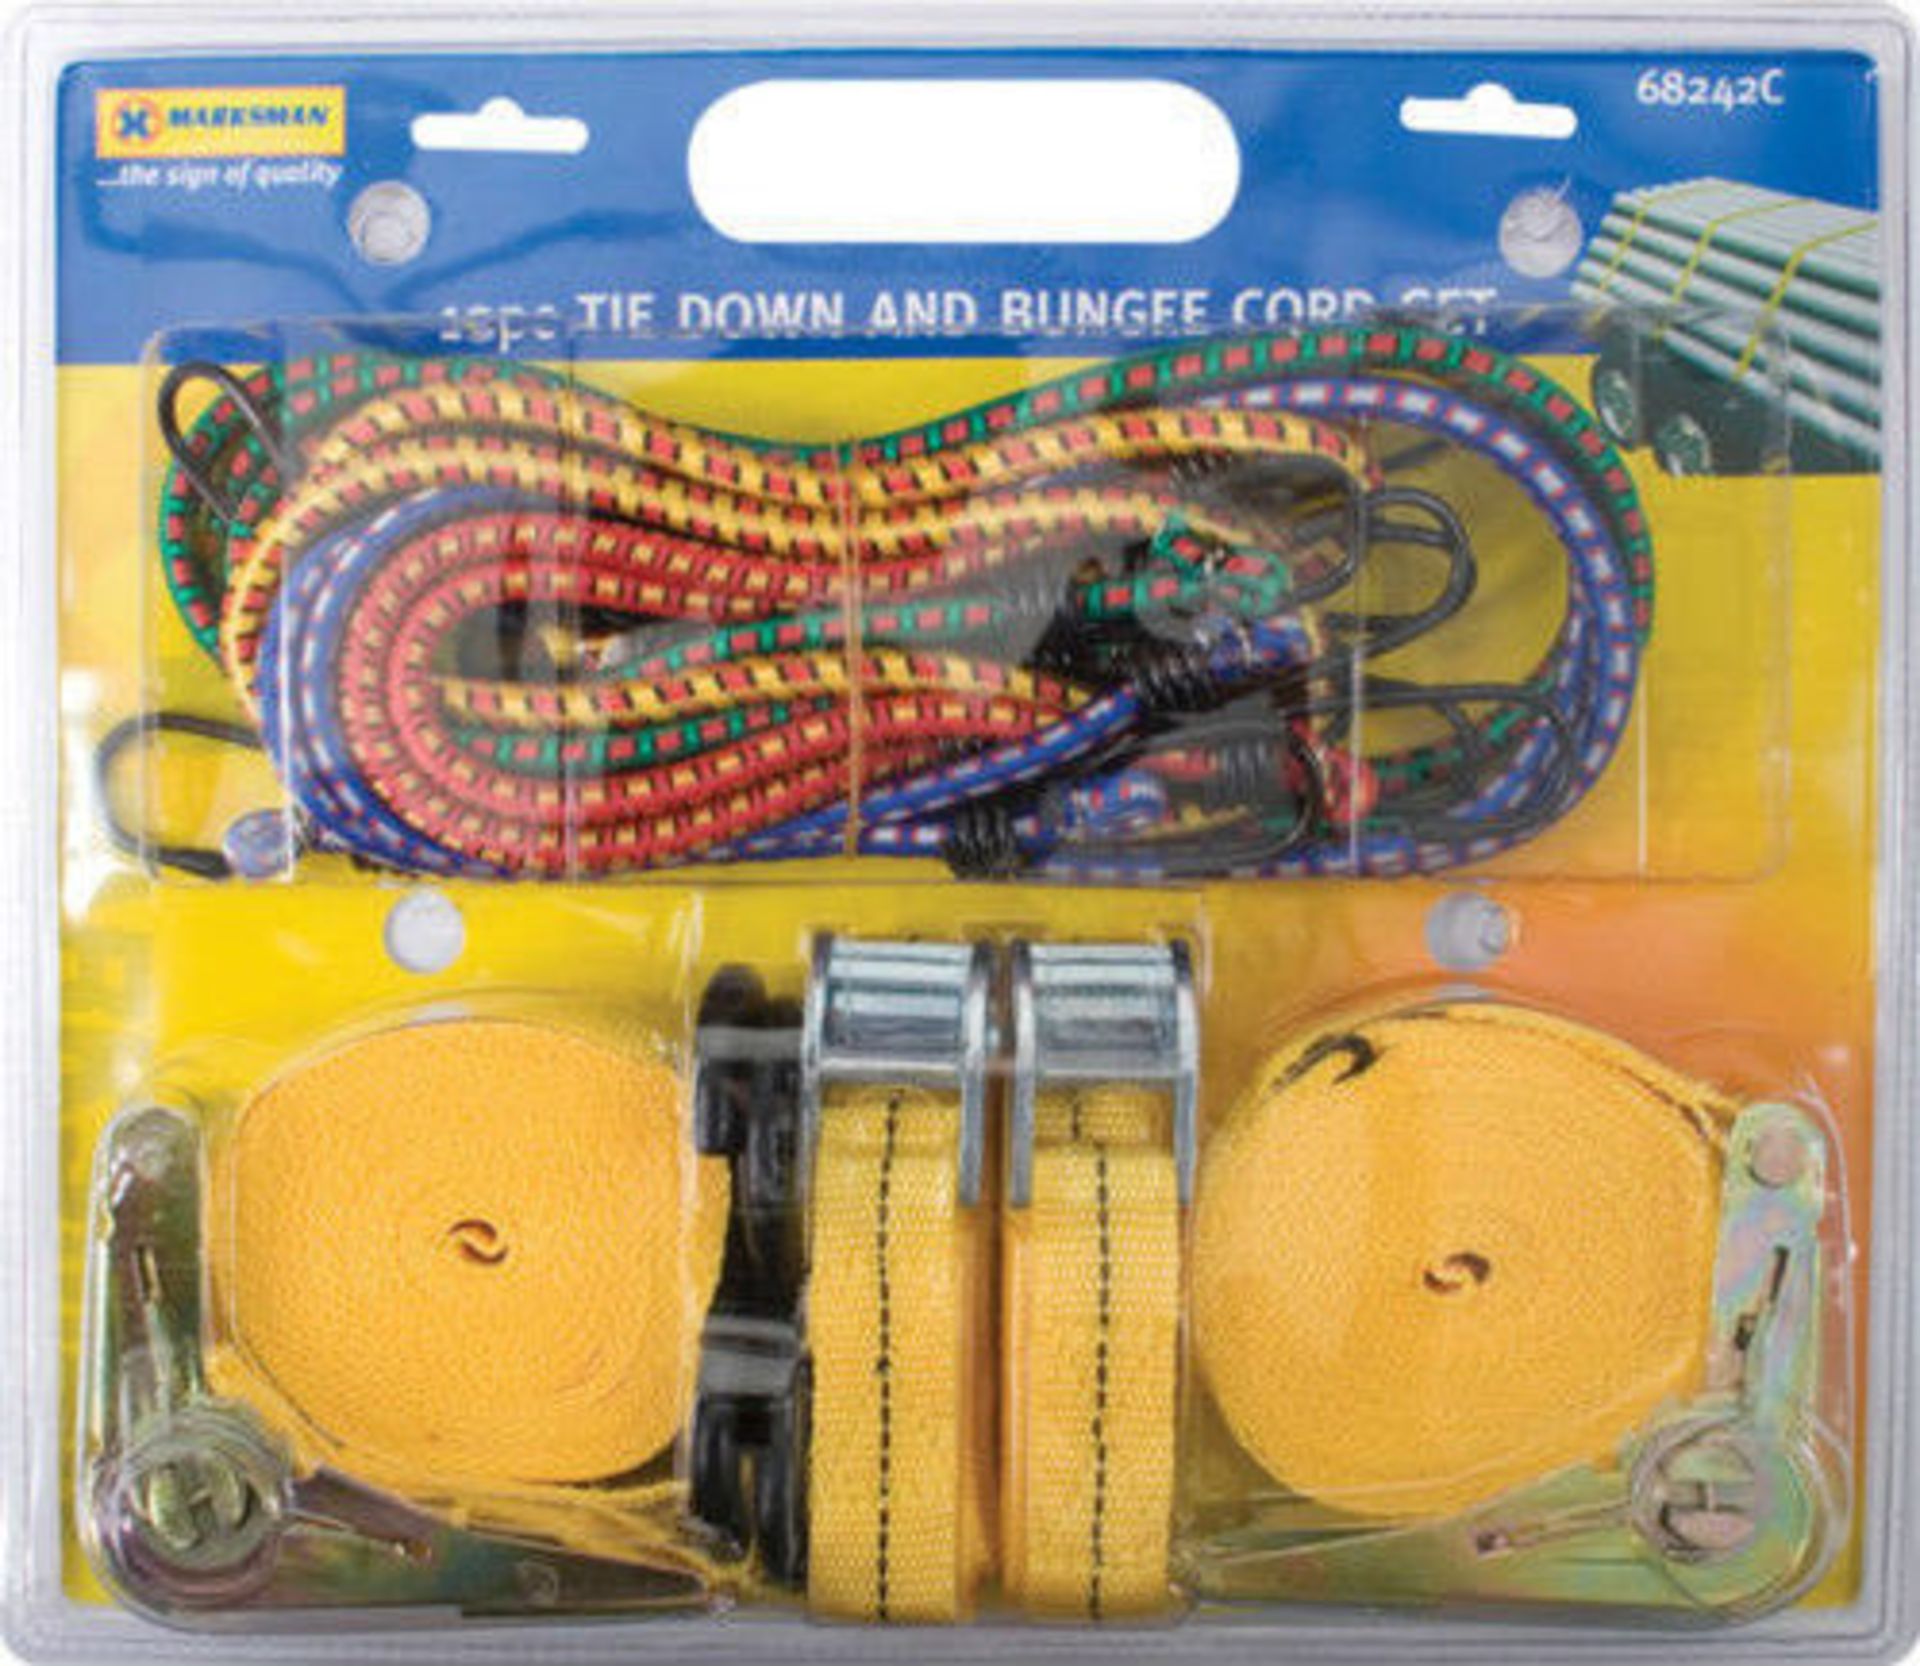 V *TRADE QTY* Brand New 12 Piece Tie Down & Bungee Cord Set X 7 YOUR BID PRICE TO BE MULTIPLIED BY